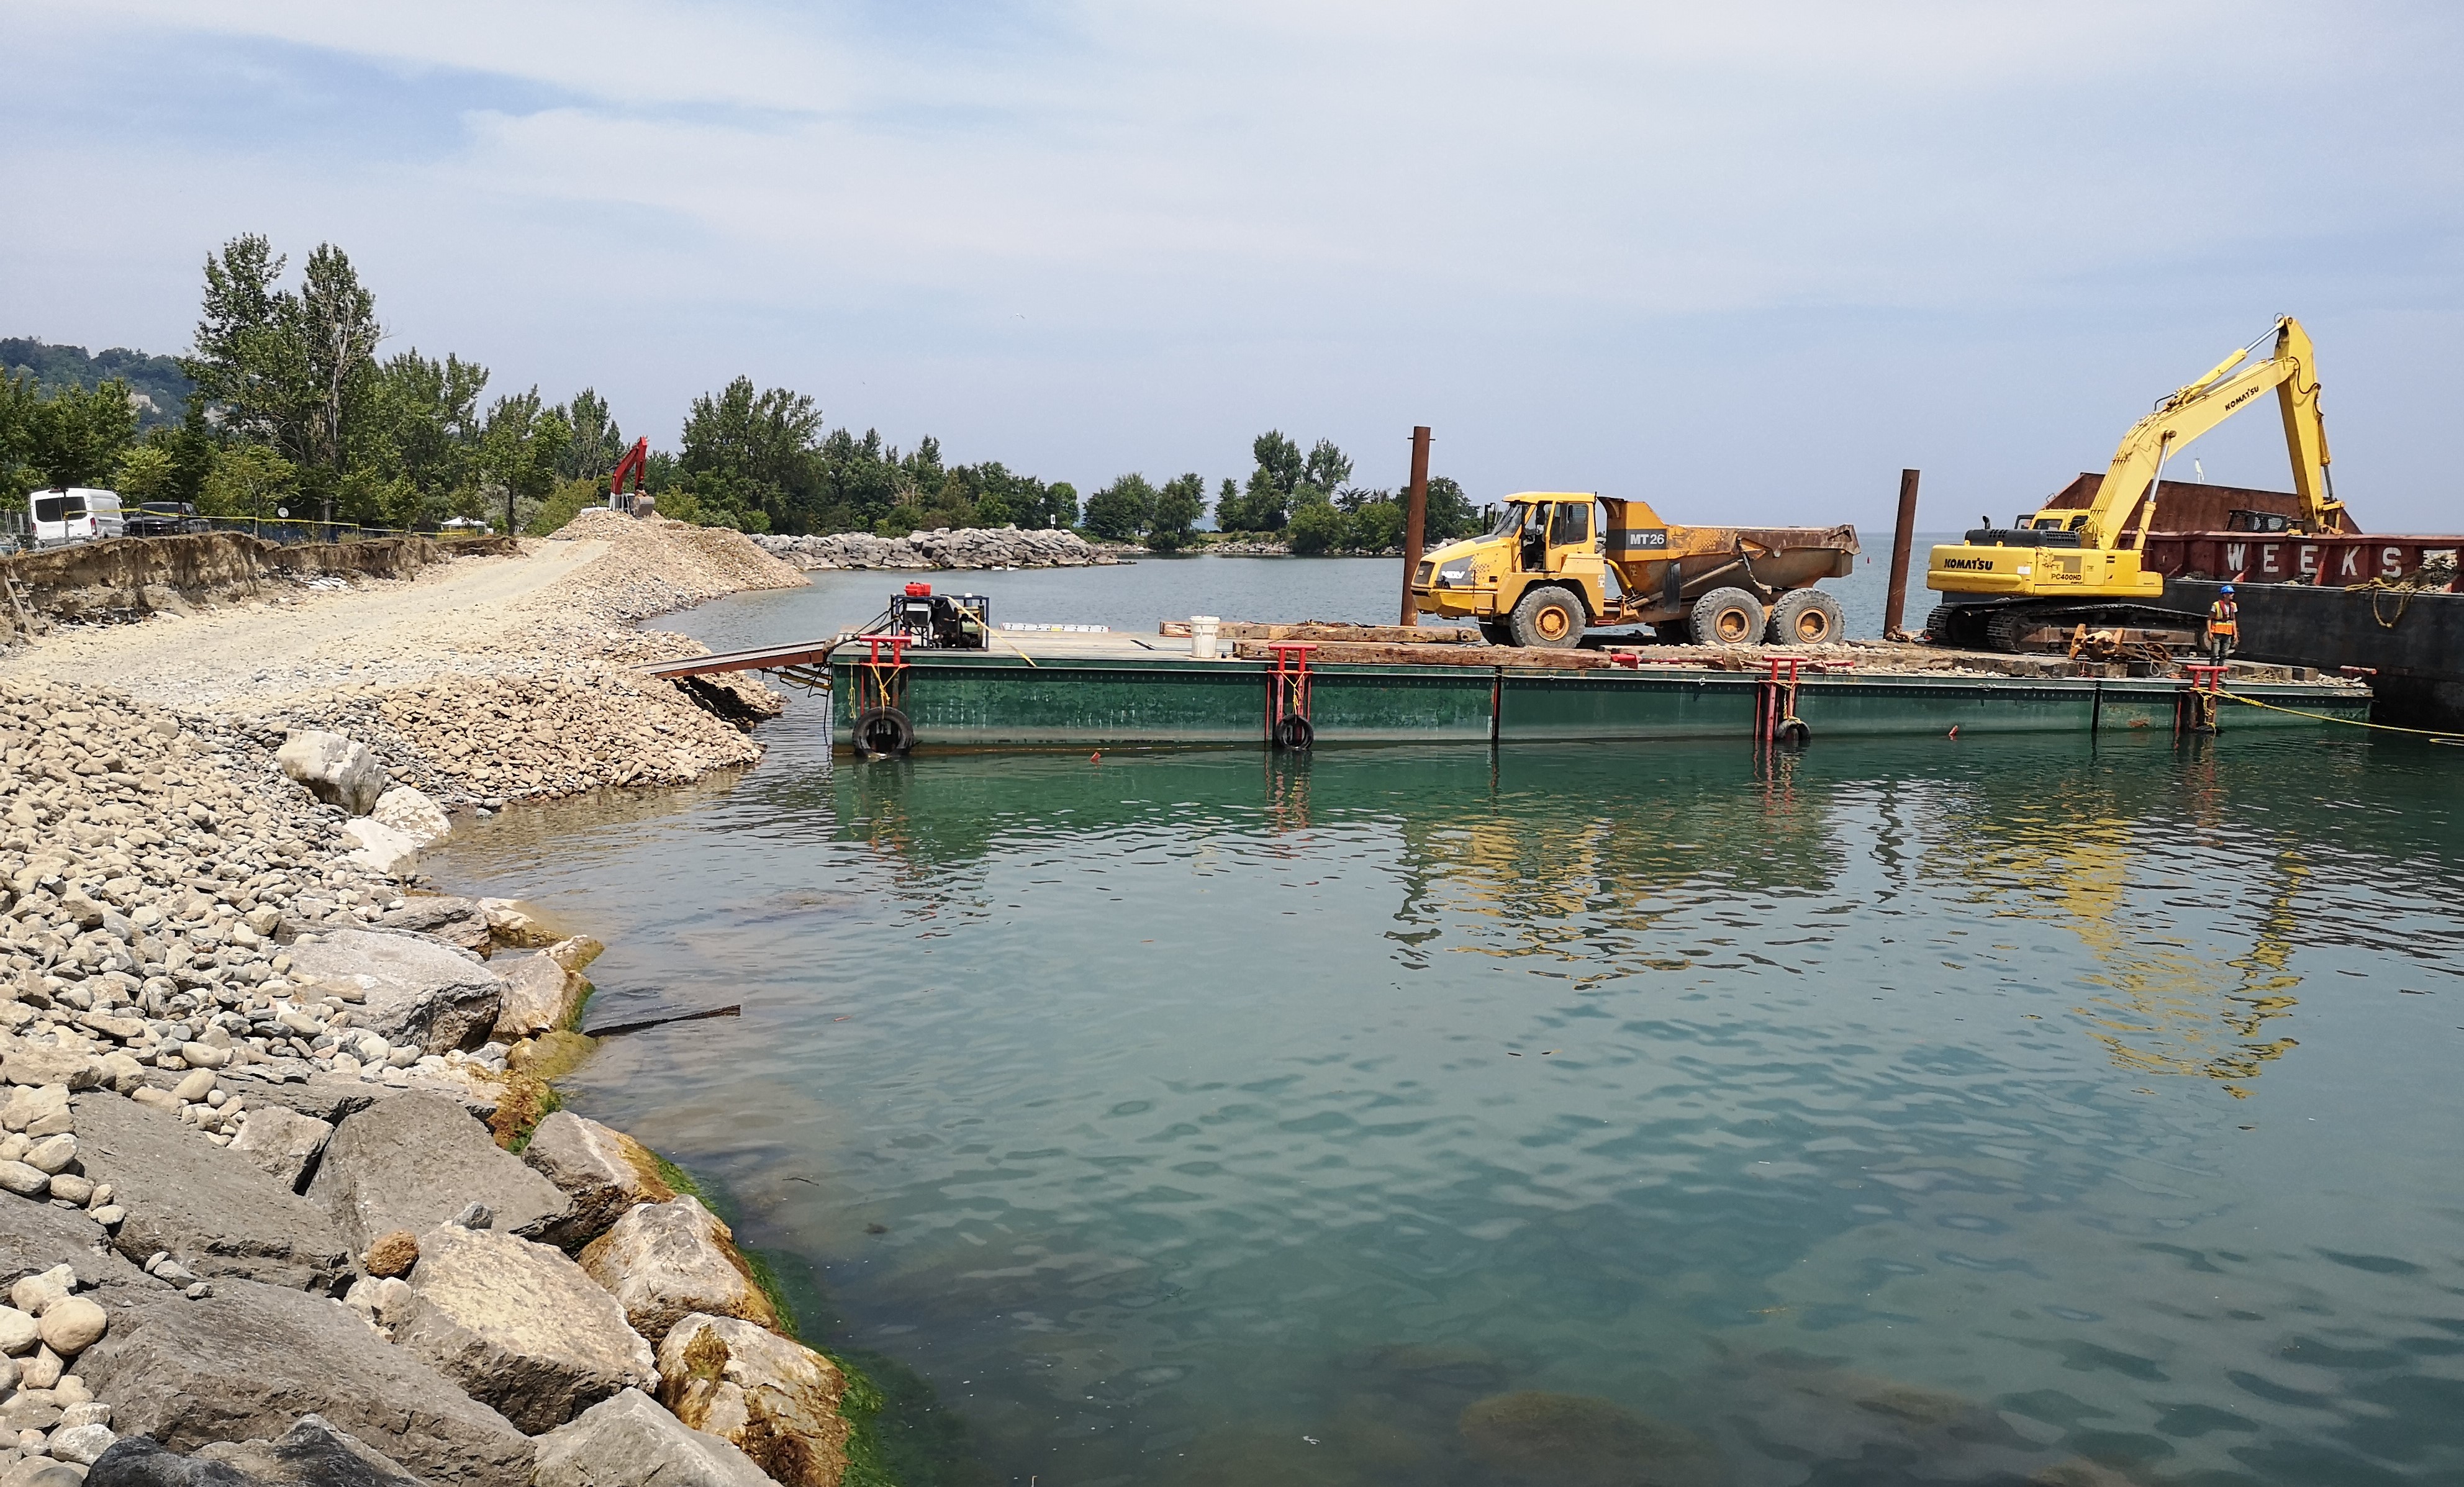 Delivery of cobble material by barge. Source: TRCA, 2018.